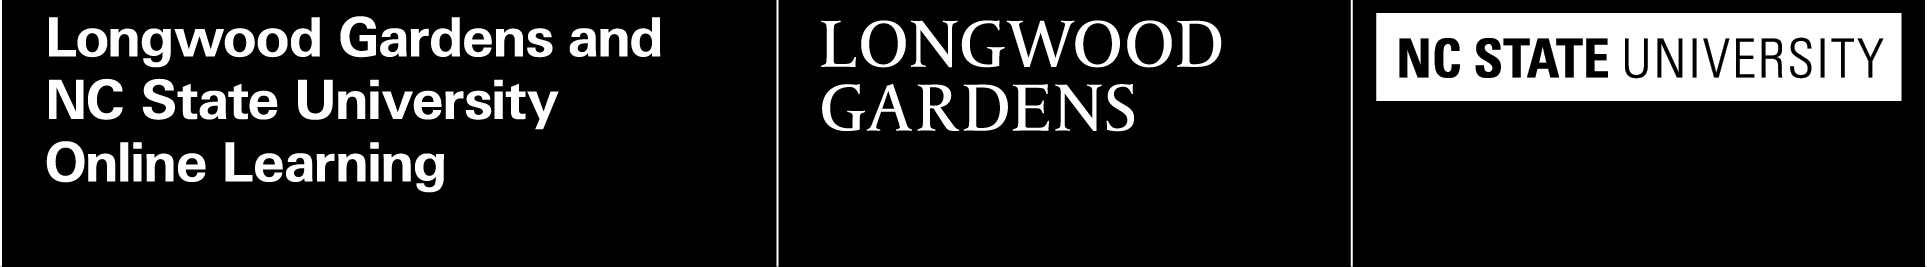 Longwood Gardens and NC State University Online Learning.